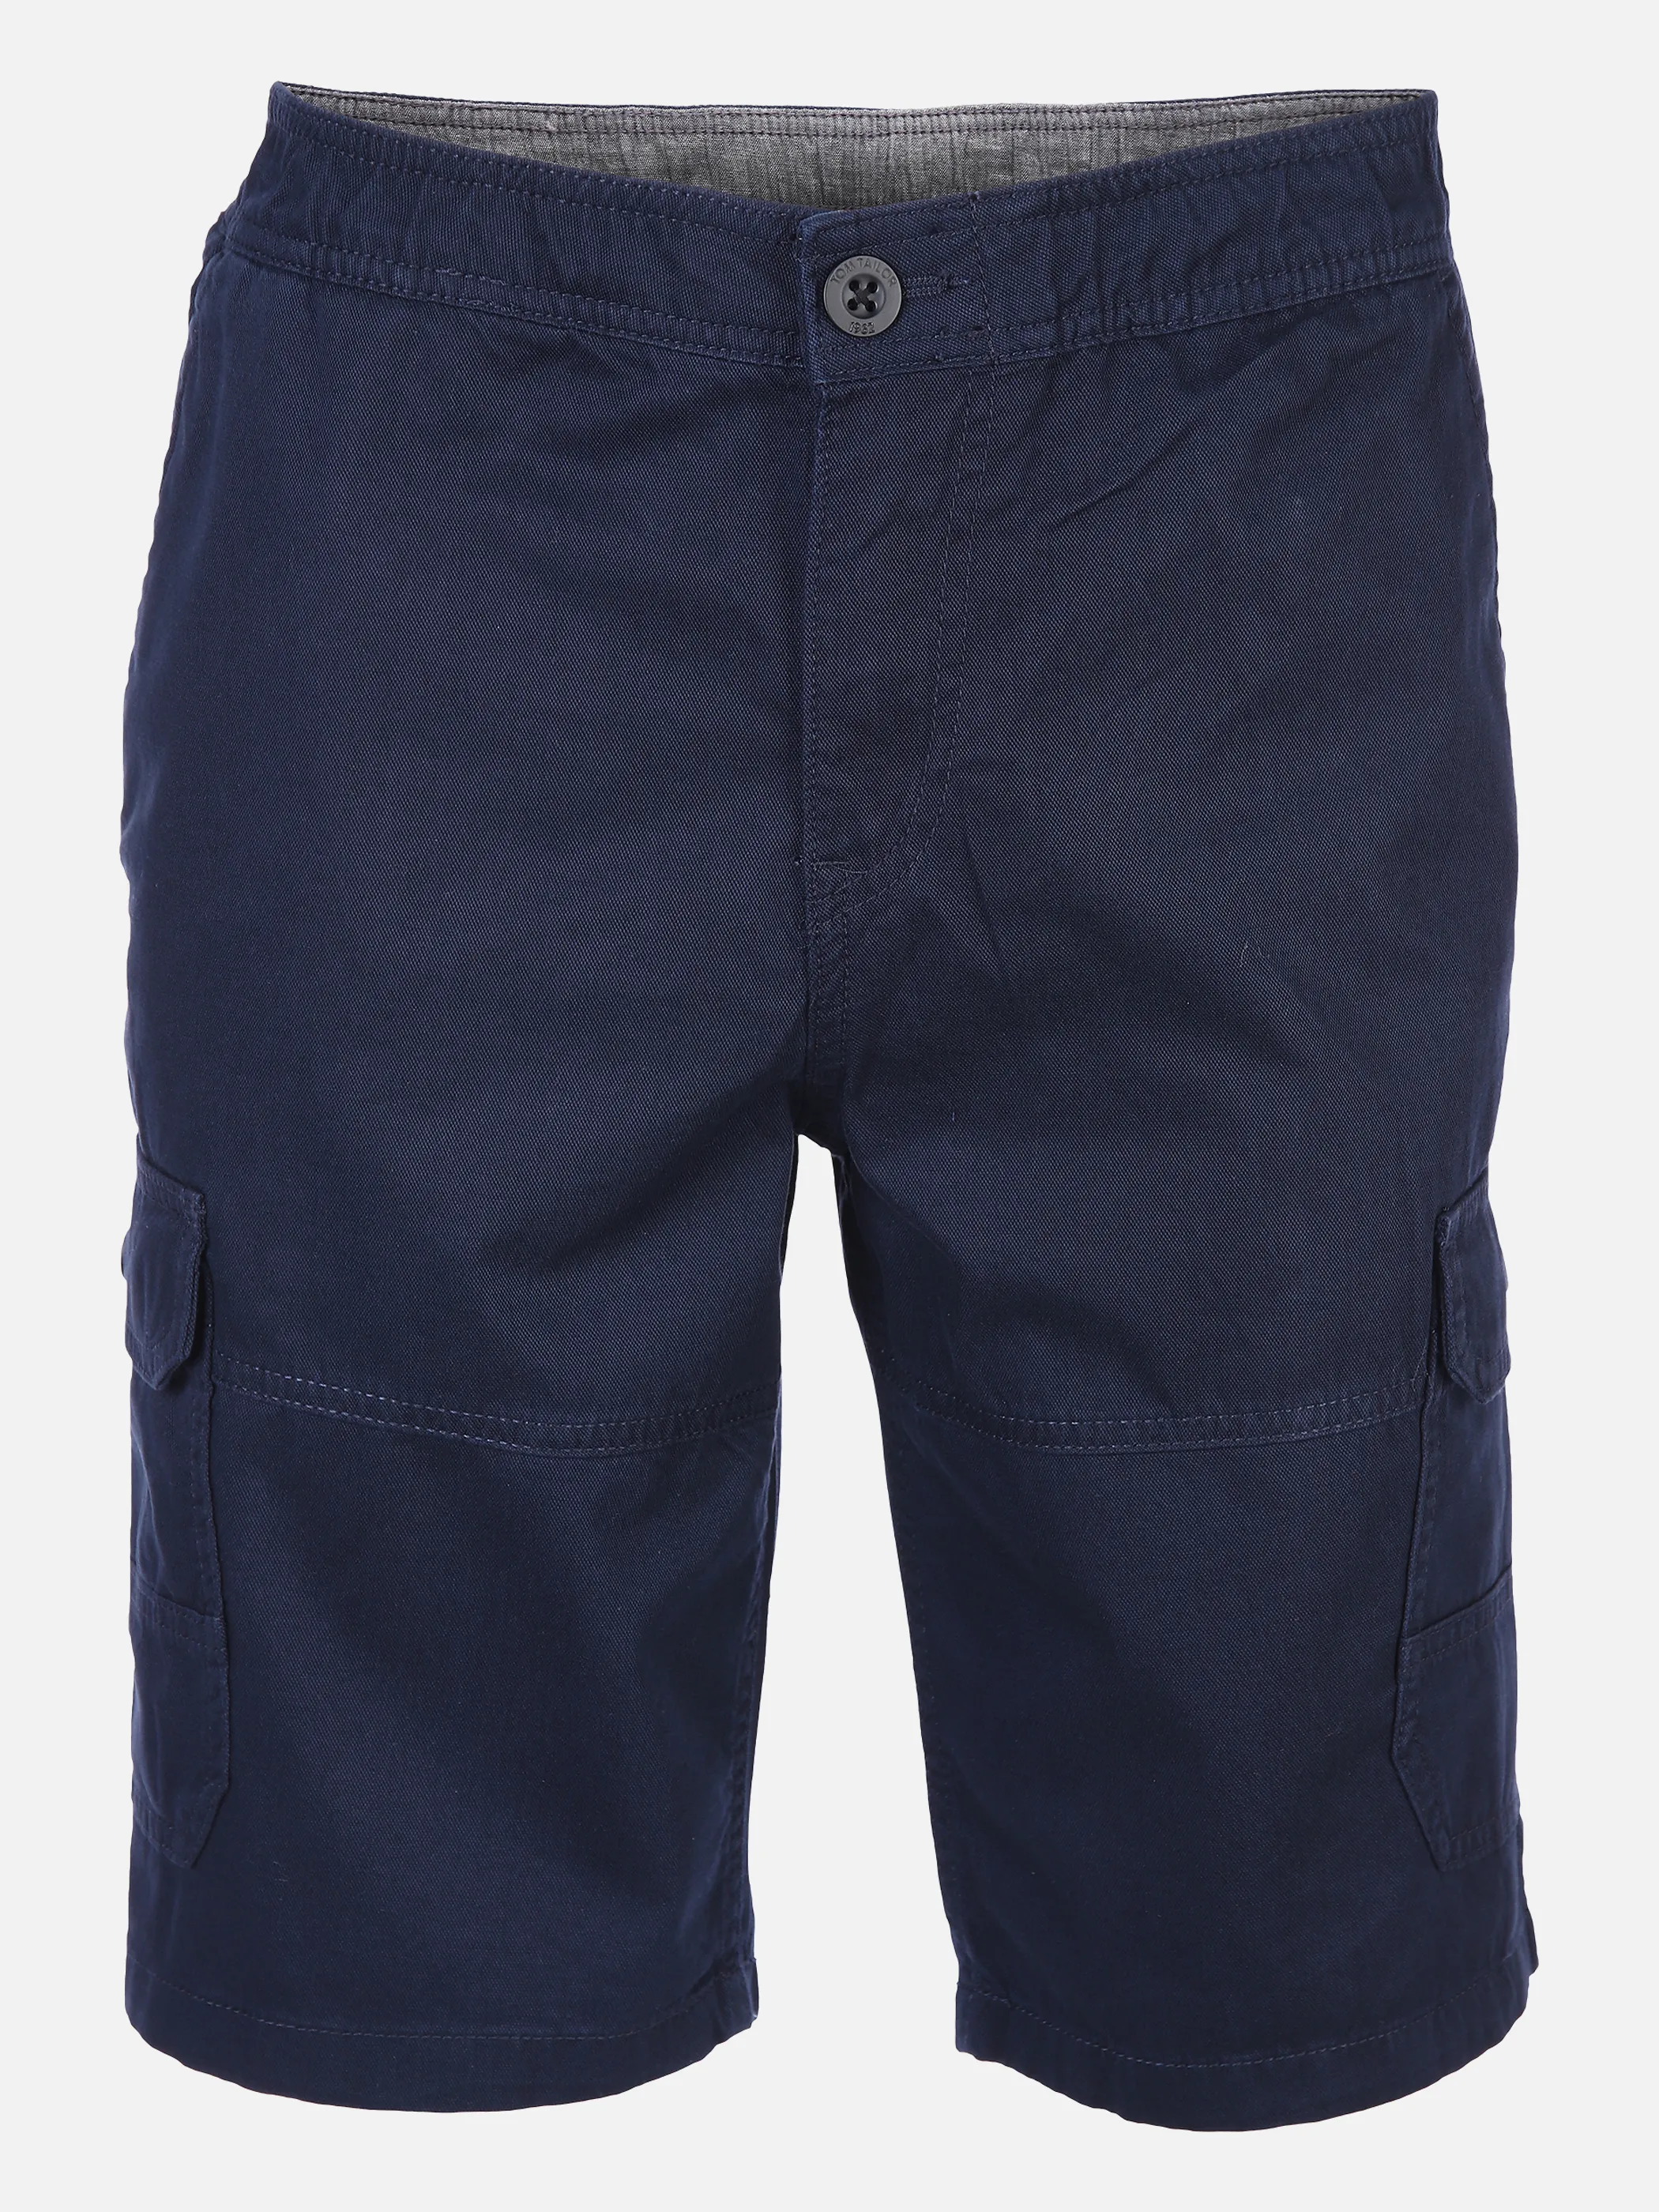 Tom Tailor 1031446 relaxed cargo shorts Blau 864567 10668 1